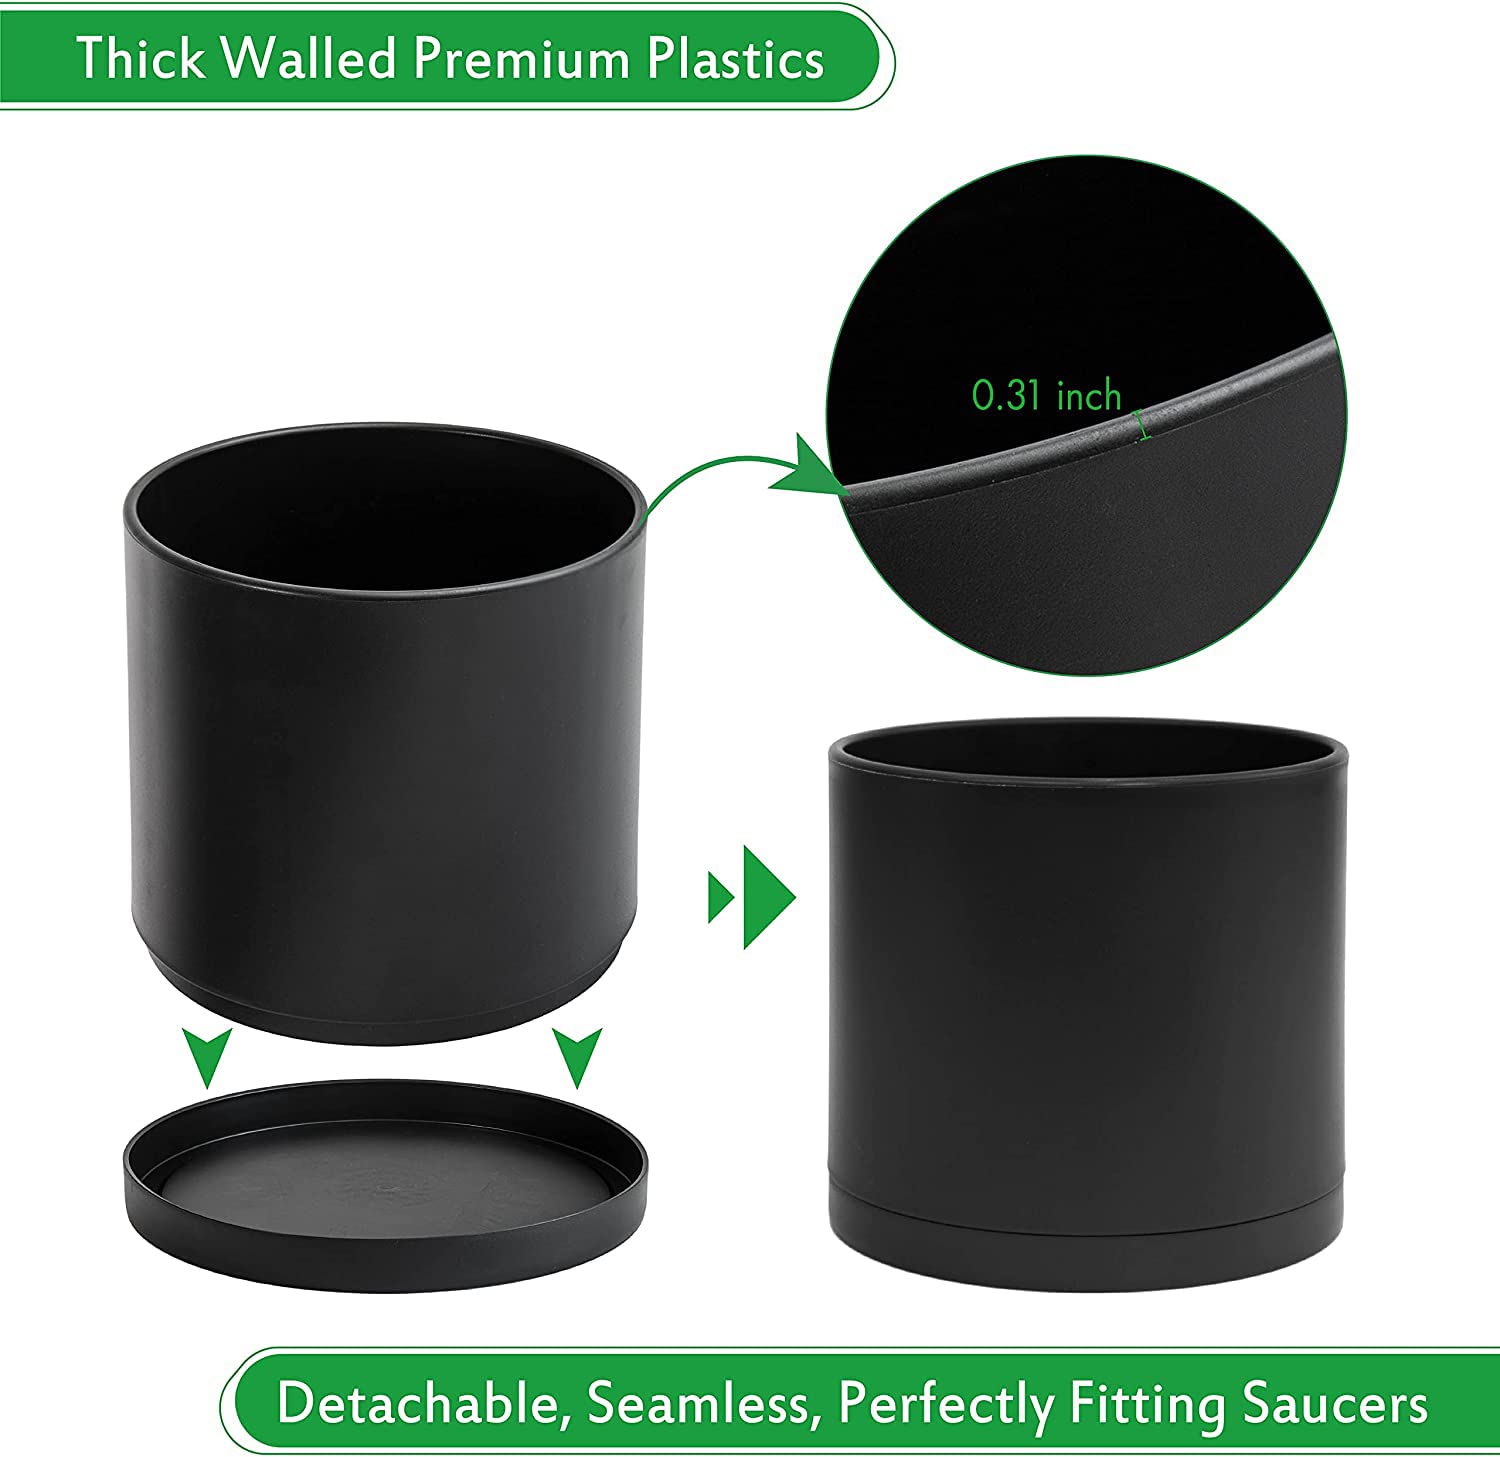 D'vine Dev 10 Inch Plastic Planter Pots for Plant Pot with Drainage Hole and Seamless Saucers, Black Color, 74-O-M-2